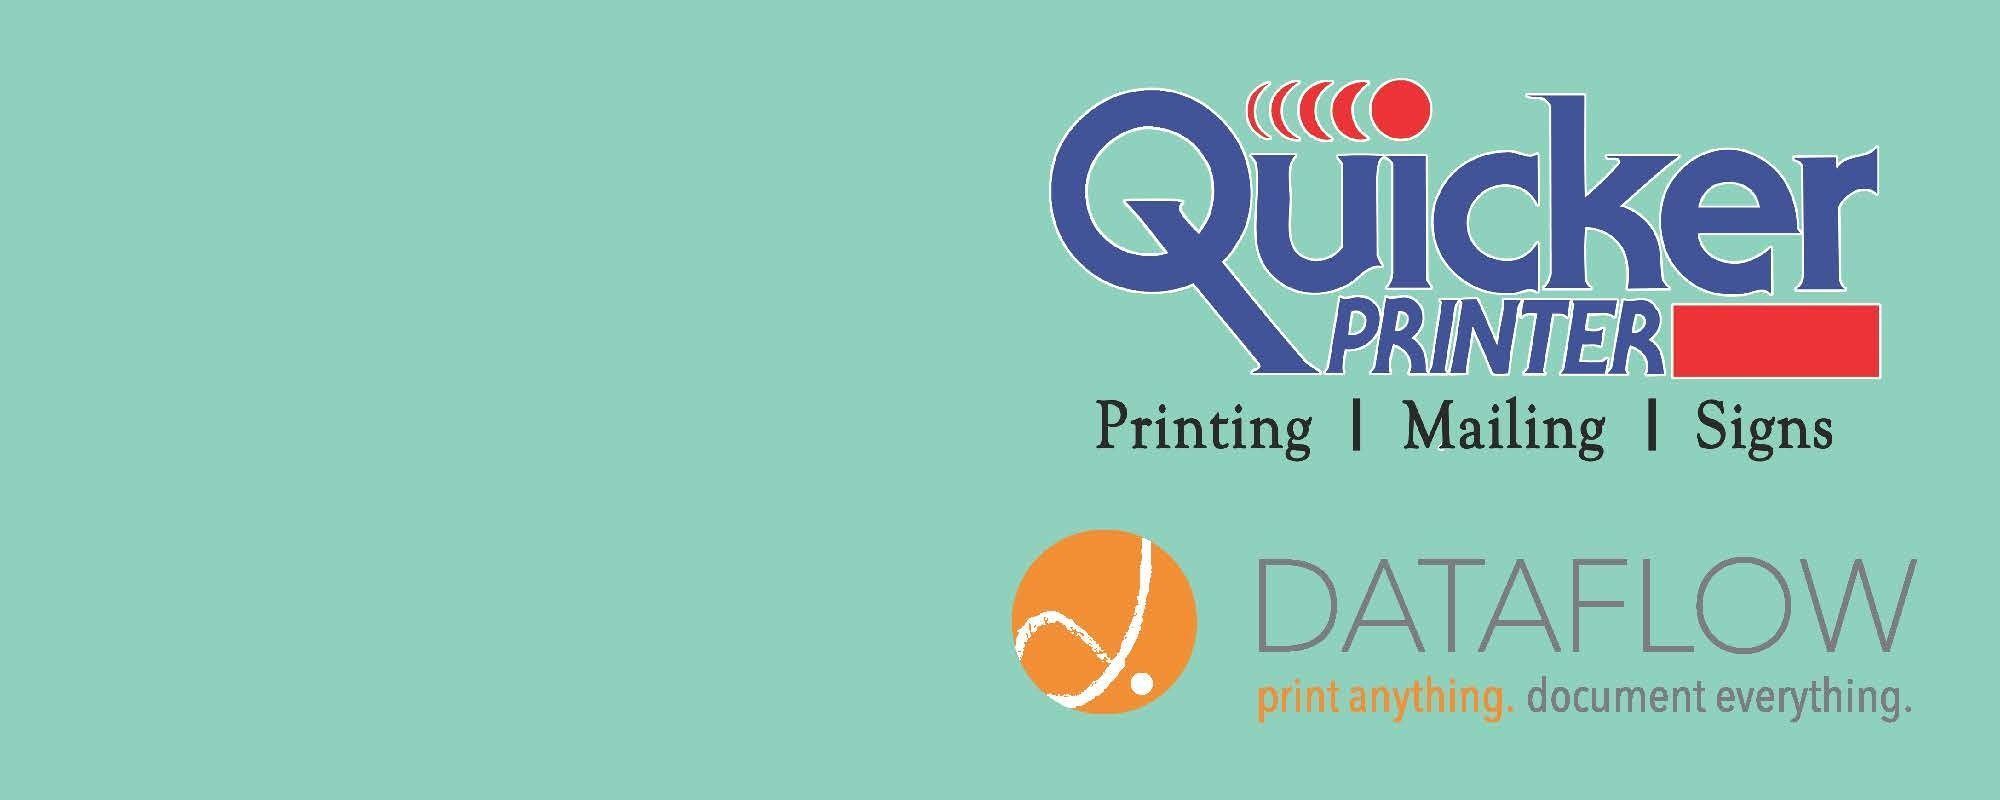 Quicker Printer is now a division of Dataflow